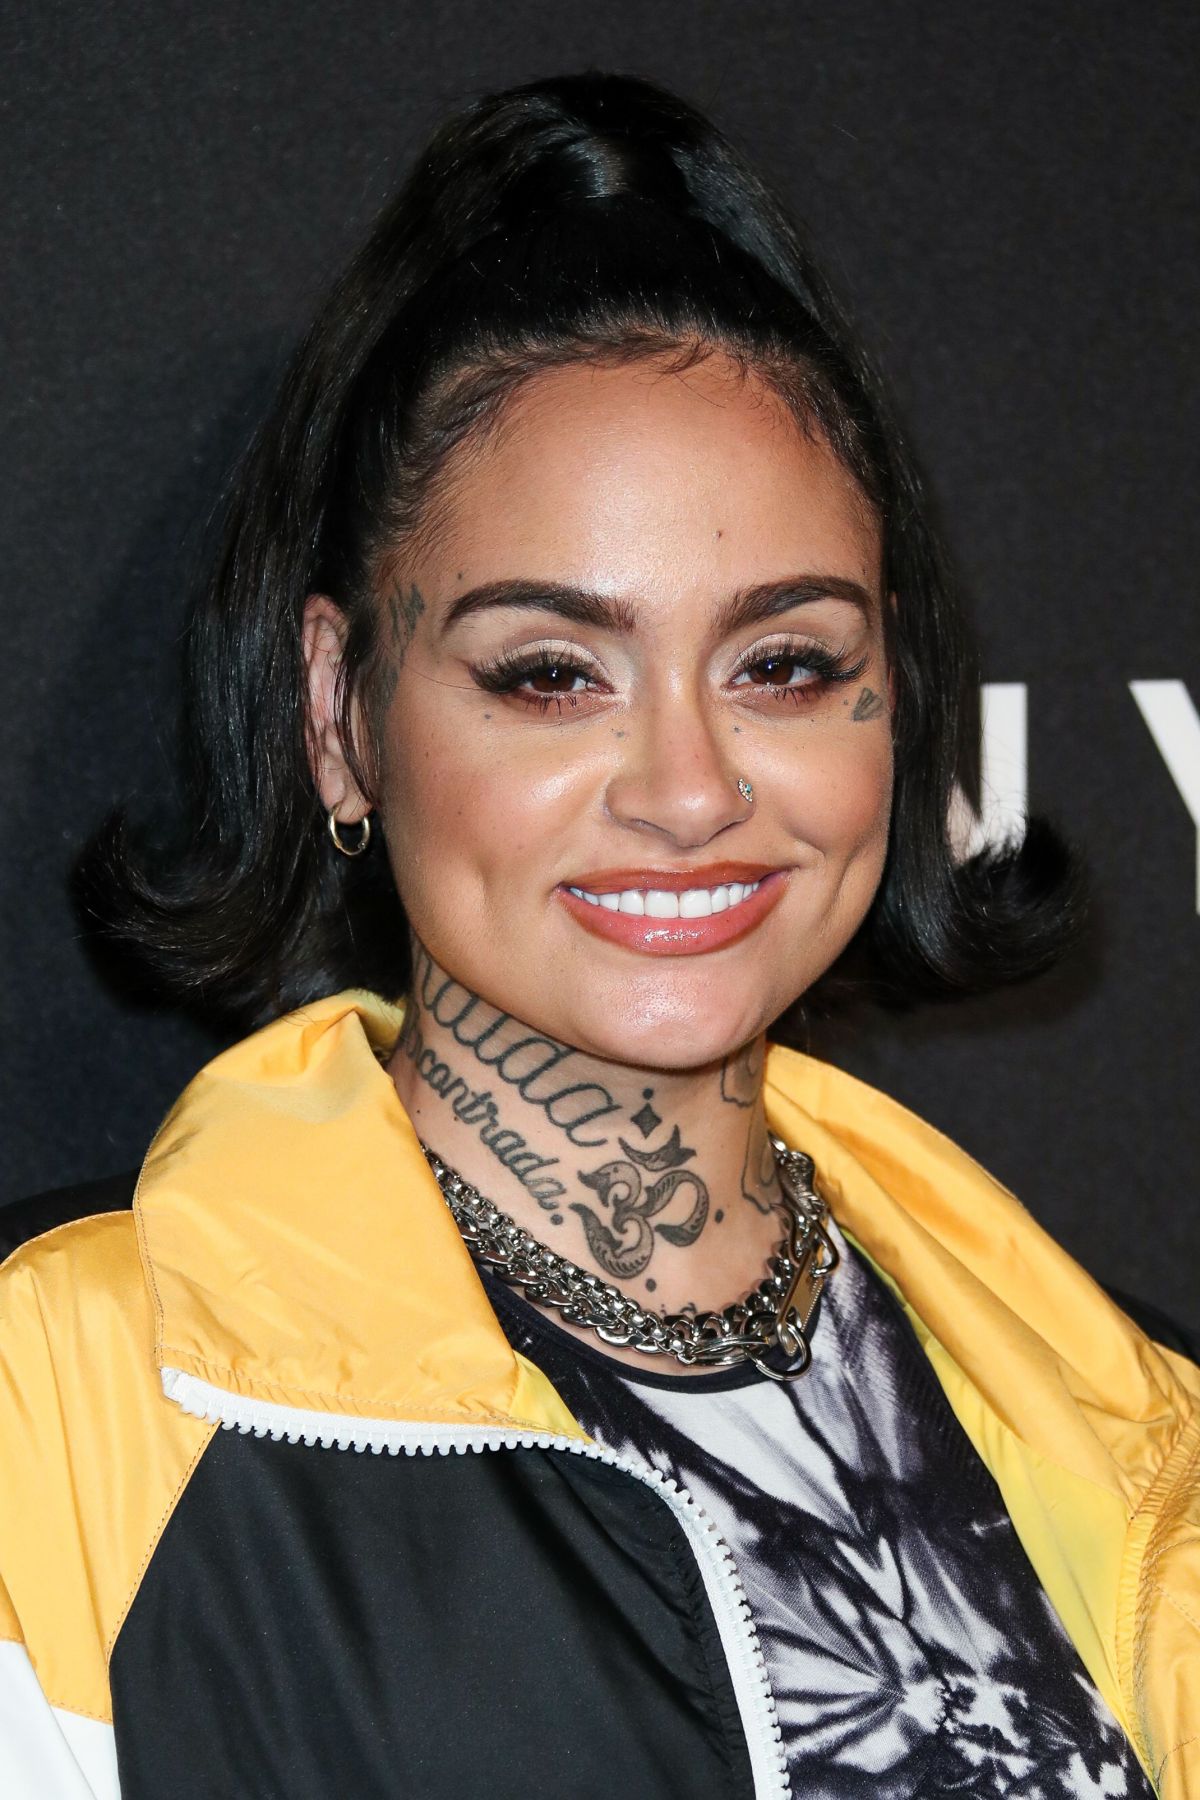 KEHLANI at DKNY 30th Anniversary Party in New York 09/09/2019 – HawtCelebs